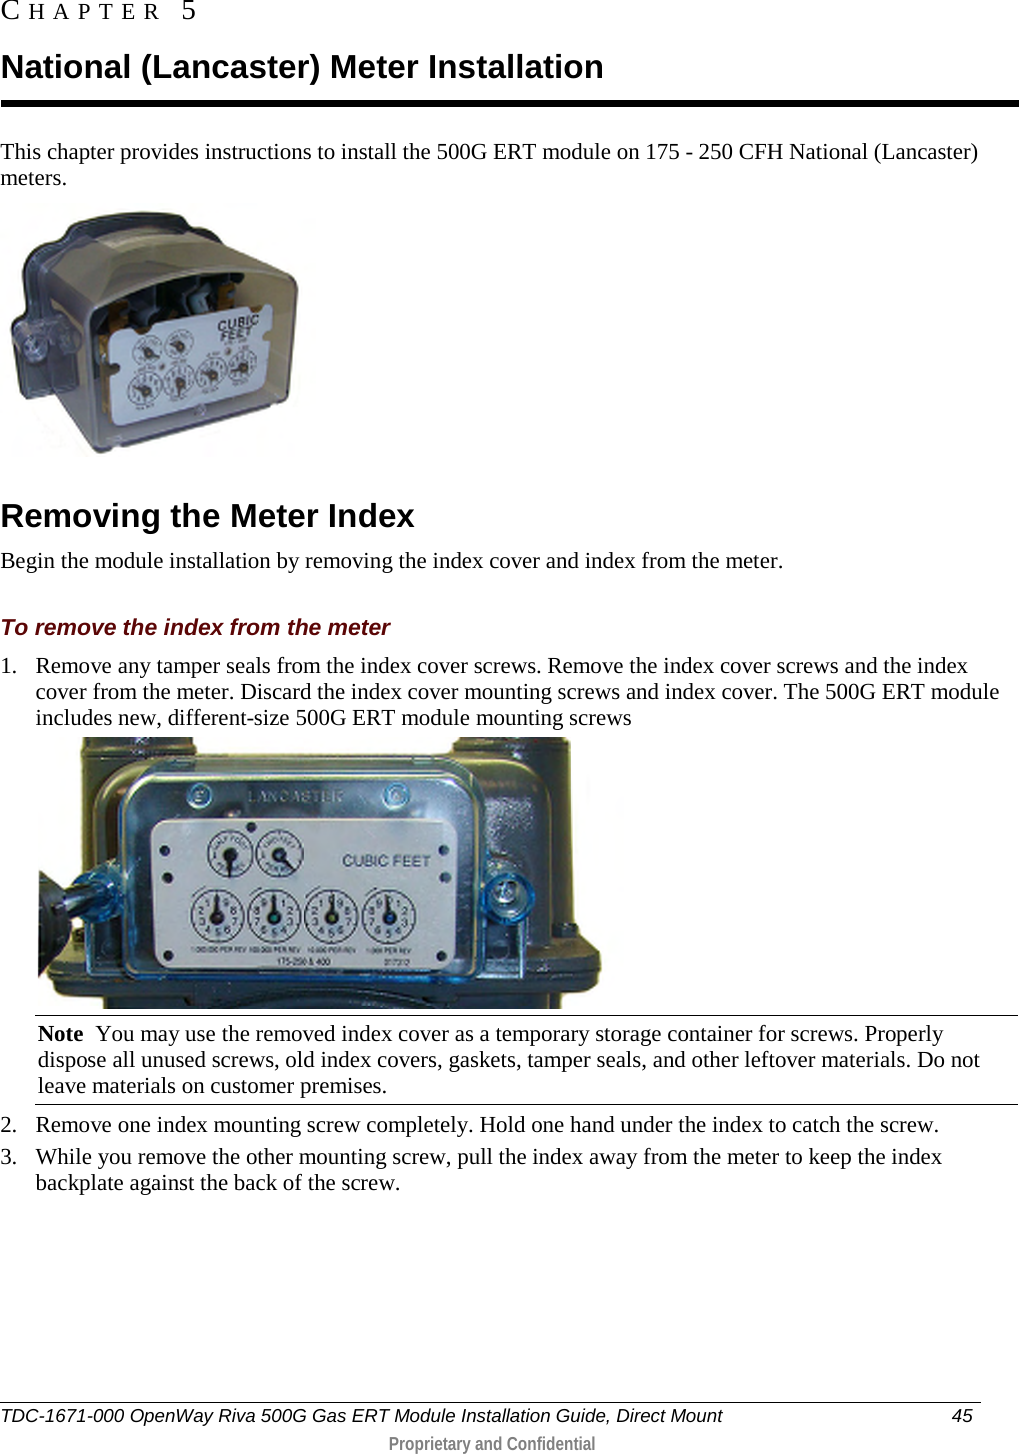  This chapter provides instructions to install the 500G ERT module on 175 - 250 CFH National (Lancaster) meters.    Removing the Meter Index Begin the module installation by removing the index cover and index from the meter.  To remove the index from the meter 1. Remove any tamper seals from the index cover screws. Remove the index cover screws and the index cover from the meter. Discard the index cover mounting screws and index cover. The 500G ERT module includes new, different-size 500G ERT module mounting screws   Note  You may use the removed index cover as a temporary storage container for screws. Properly dispose all unused screws, old index covers, gaskets, tamper seals, and other leftover materials. Do not leave materials on customer premises.  2. Remove one index mounting screw completely. Hold one hand under the index to catch the screw.  3. While you remove the other mounting screw, pull the index away from the meter to keep the index backplate against the back of the screw.  CHAPTER  5  National (Lancaster) Meter Installation TDC-1671-000 OpenWay Riva 500G Gas ERT Module Installation Guide, Direct Mount 45   Proprietary and Confidential  